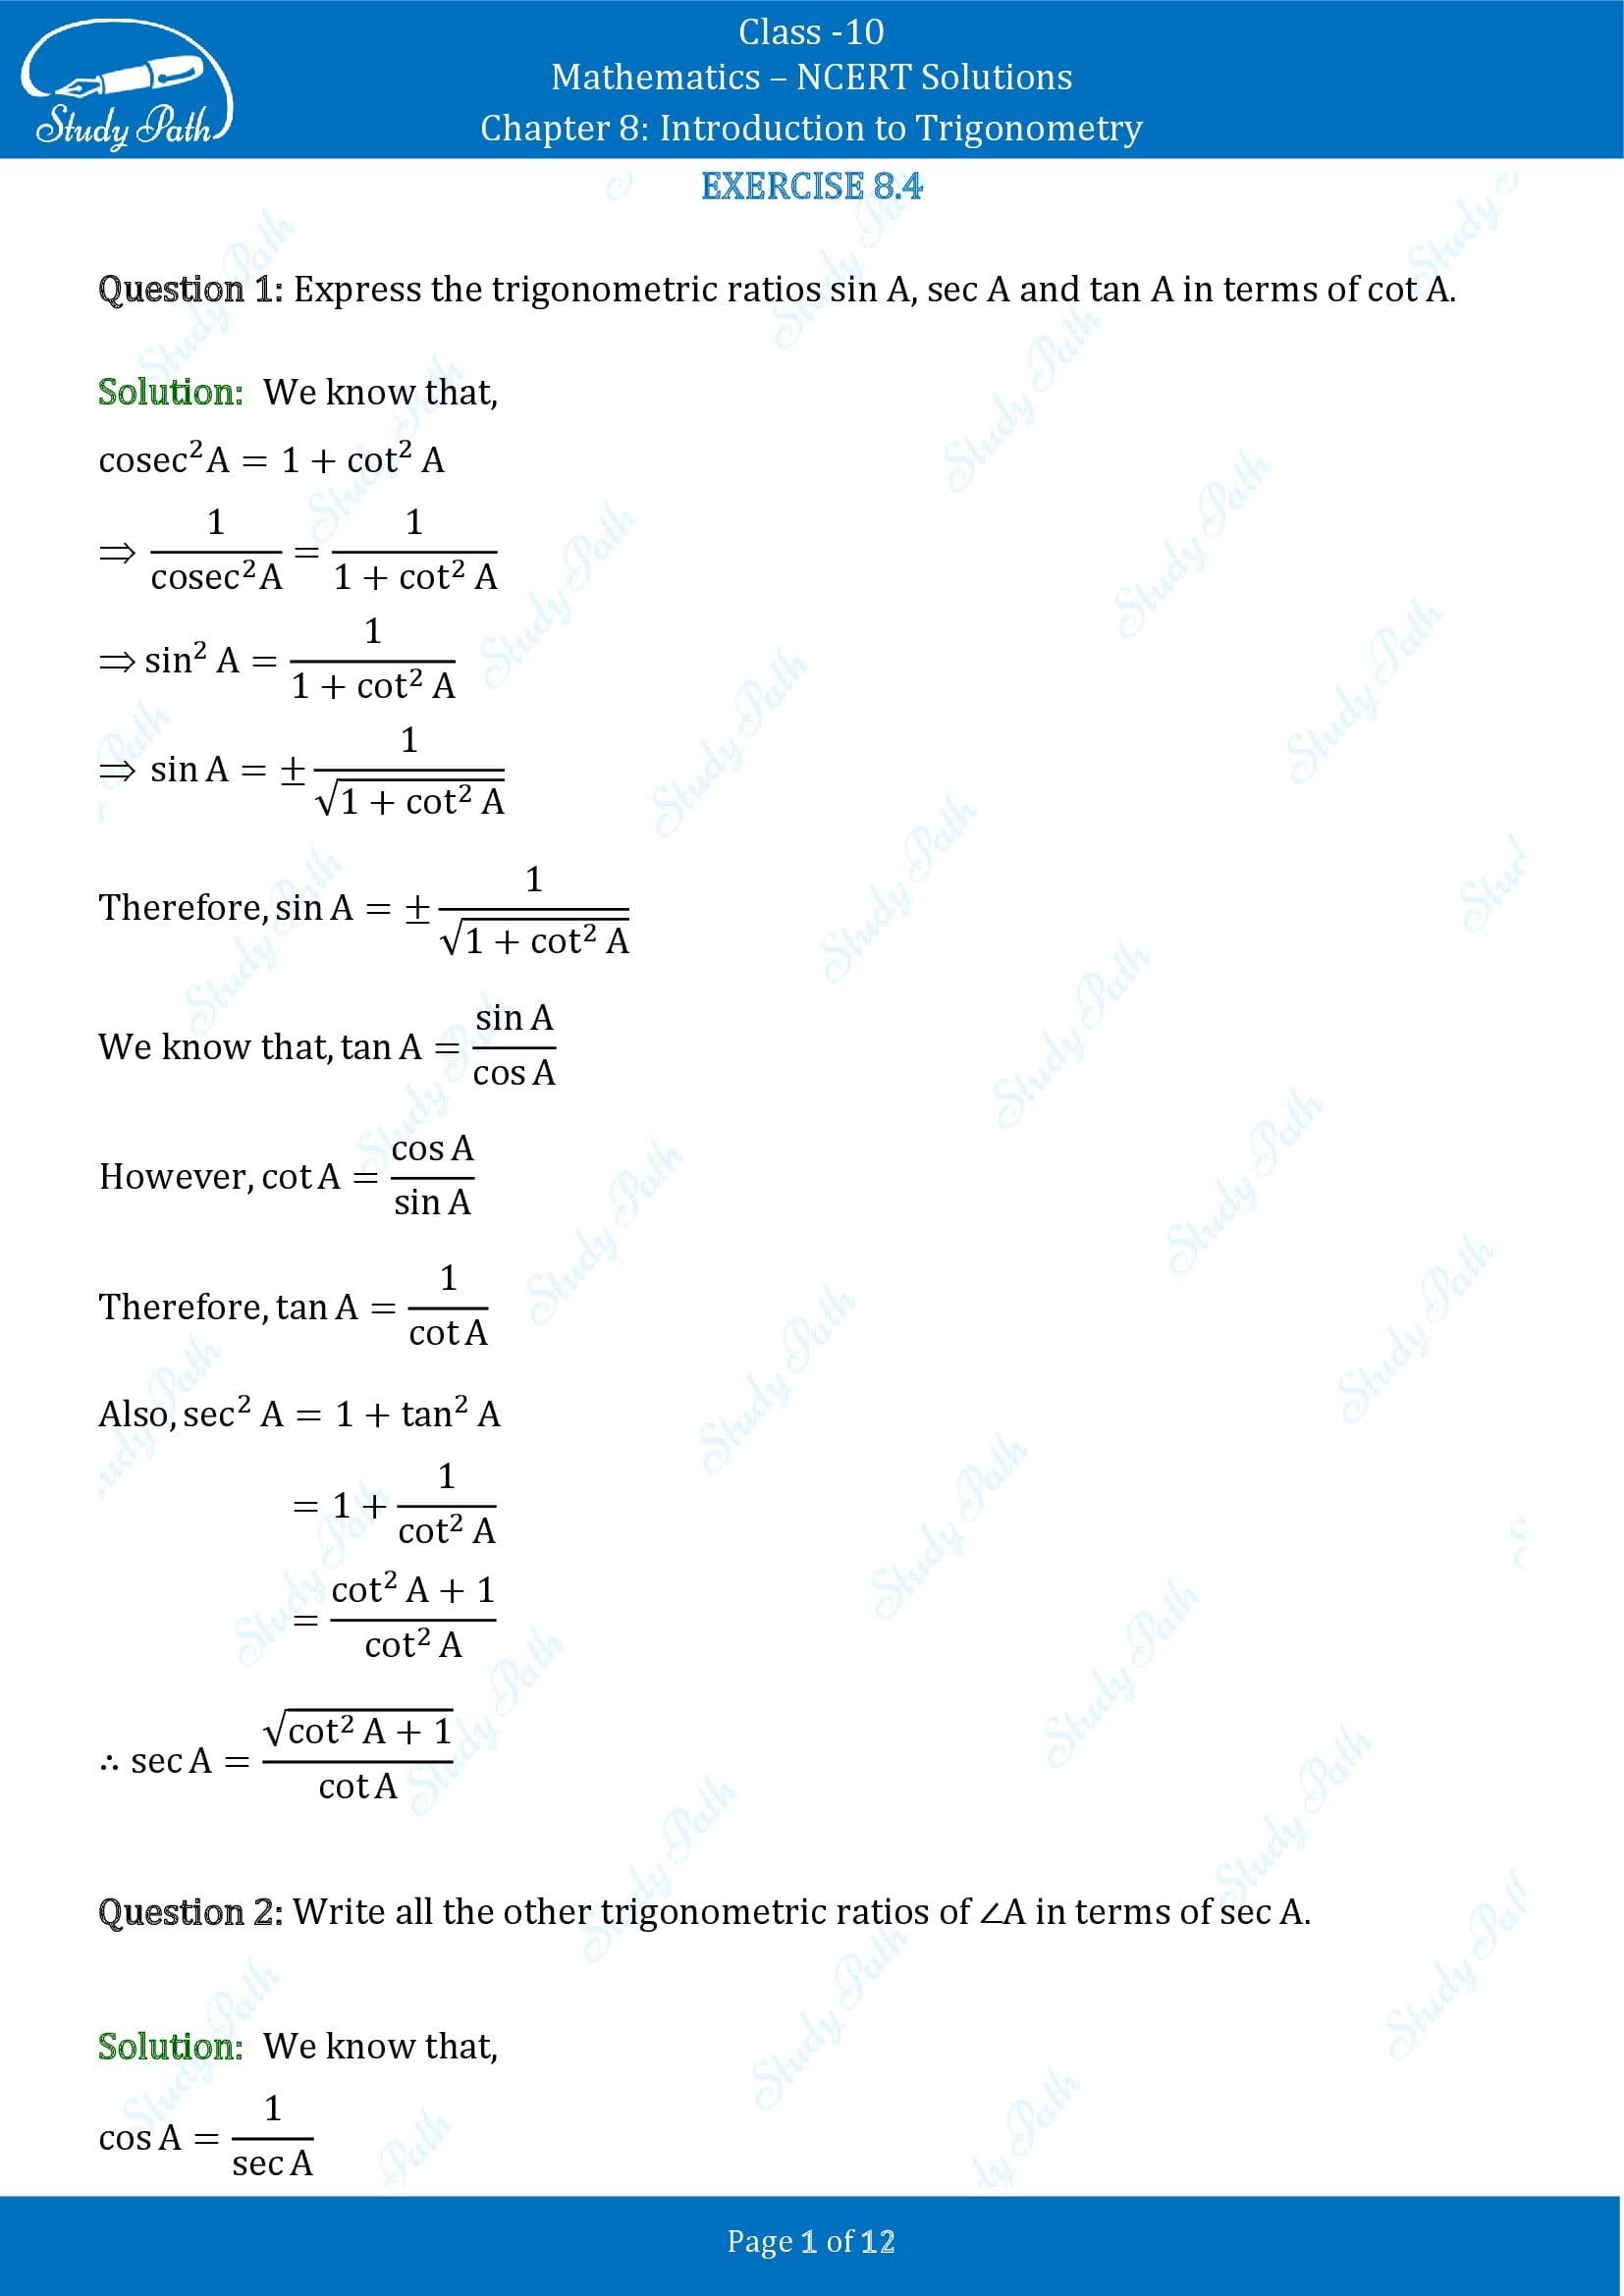 NCERT Solutions for Class 10 Maths Chapter 8 Introduction to Trigonometry Exercise 8.4 00001